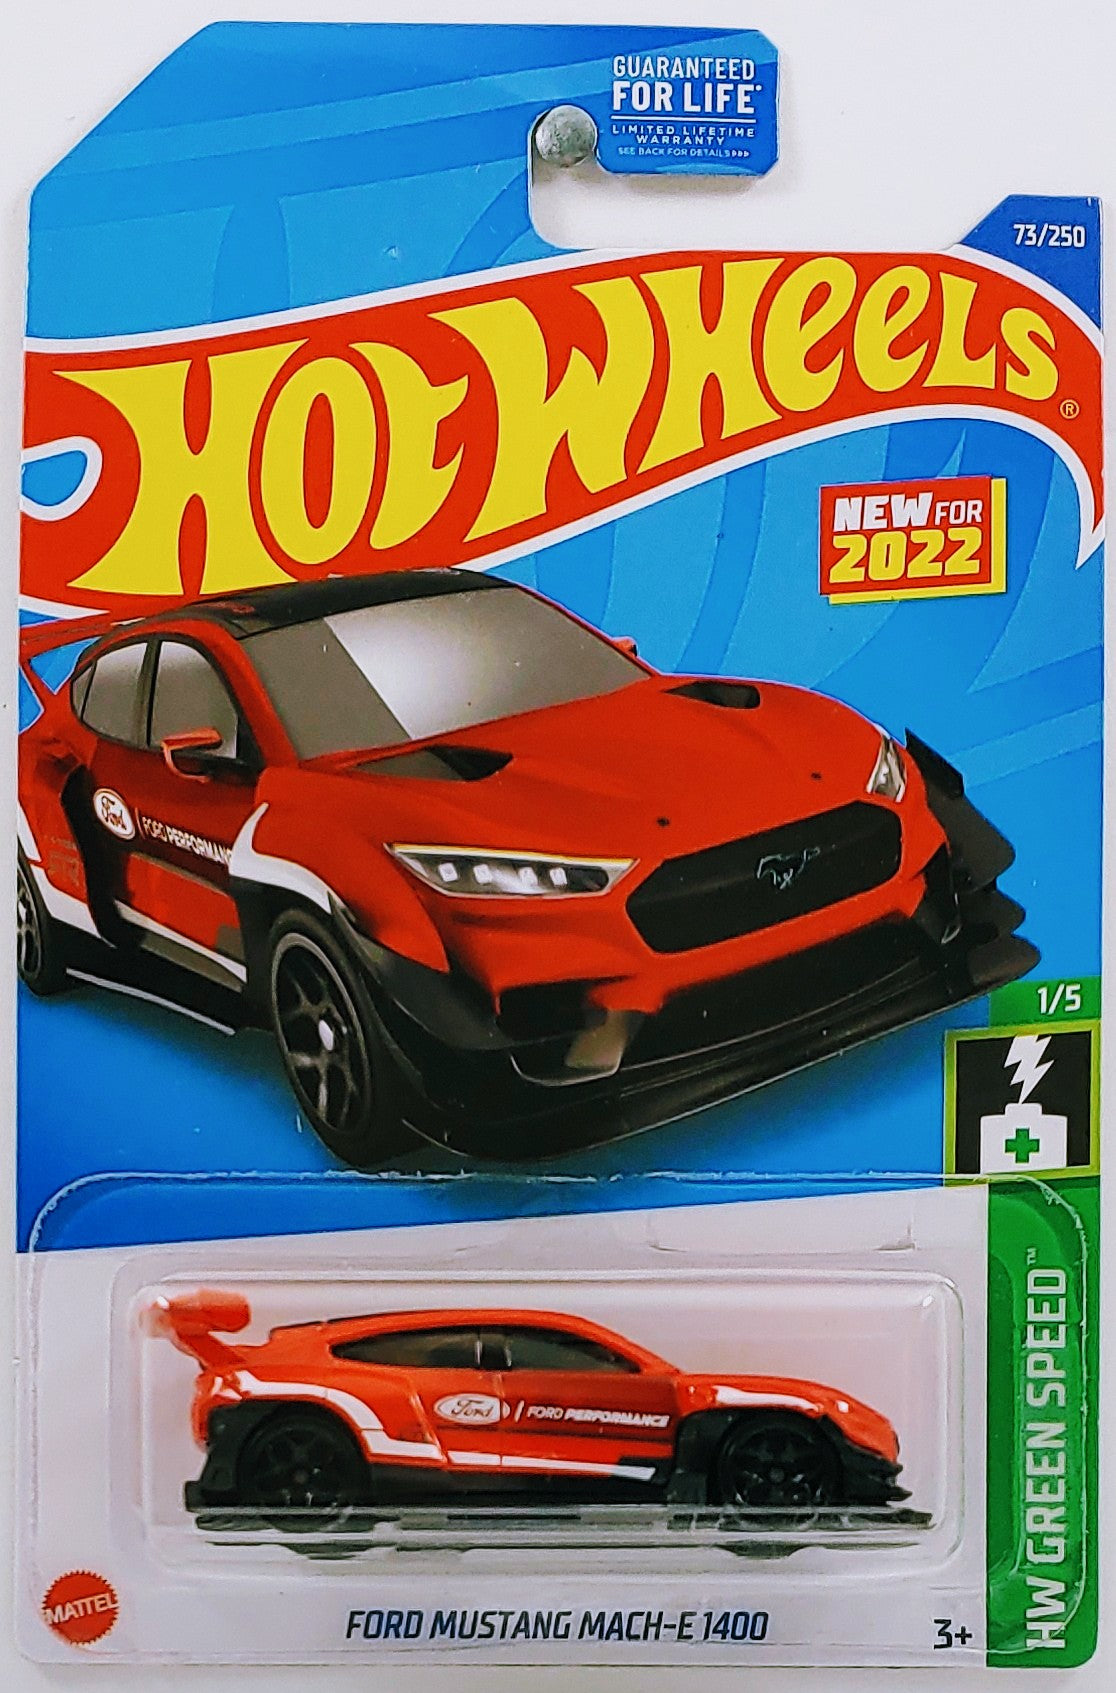 Hot Wheels 2022 - Collector # 073/250 - HW Green Speed 1/5 - New Models - Ford Mustang MACH-E 1400 - Red